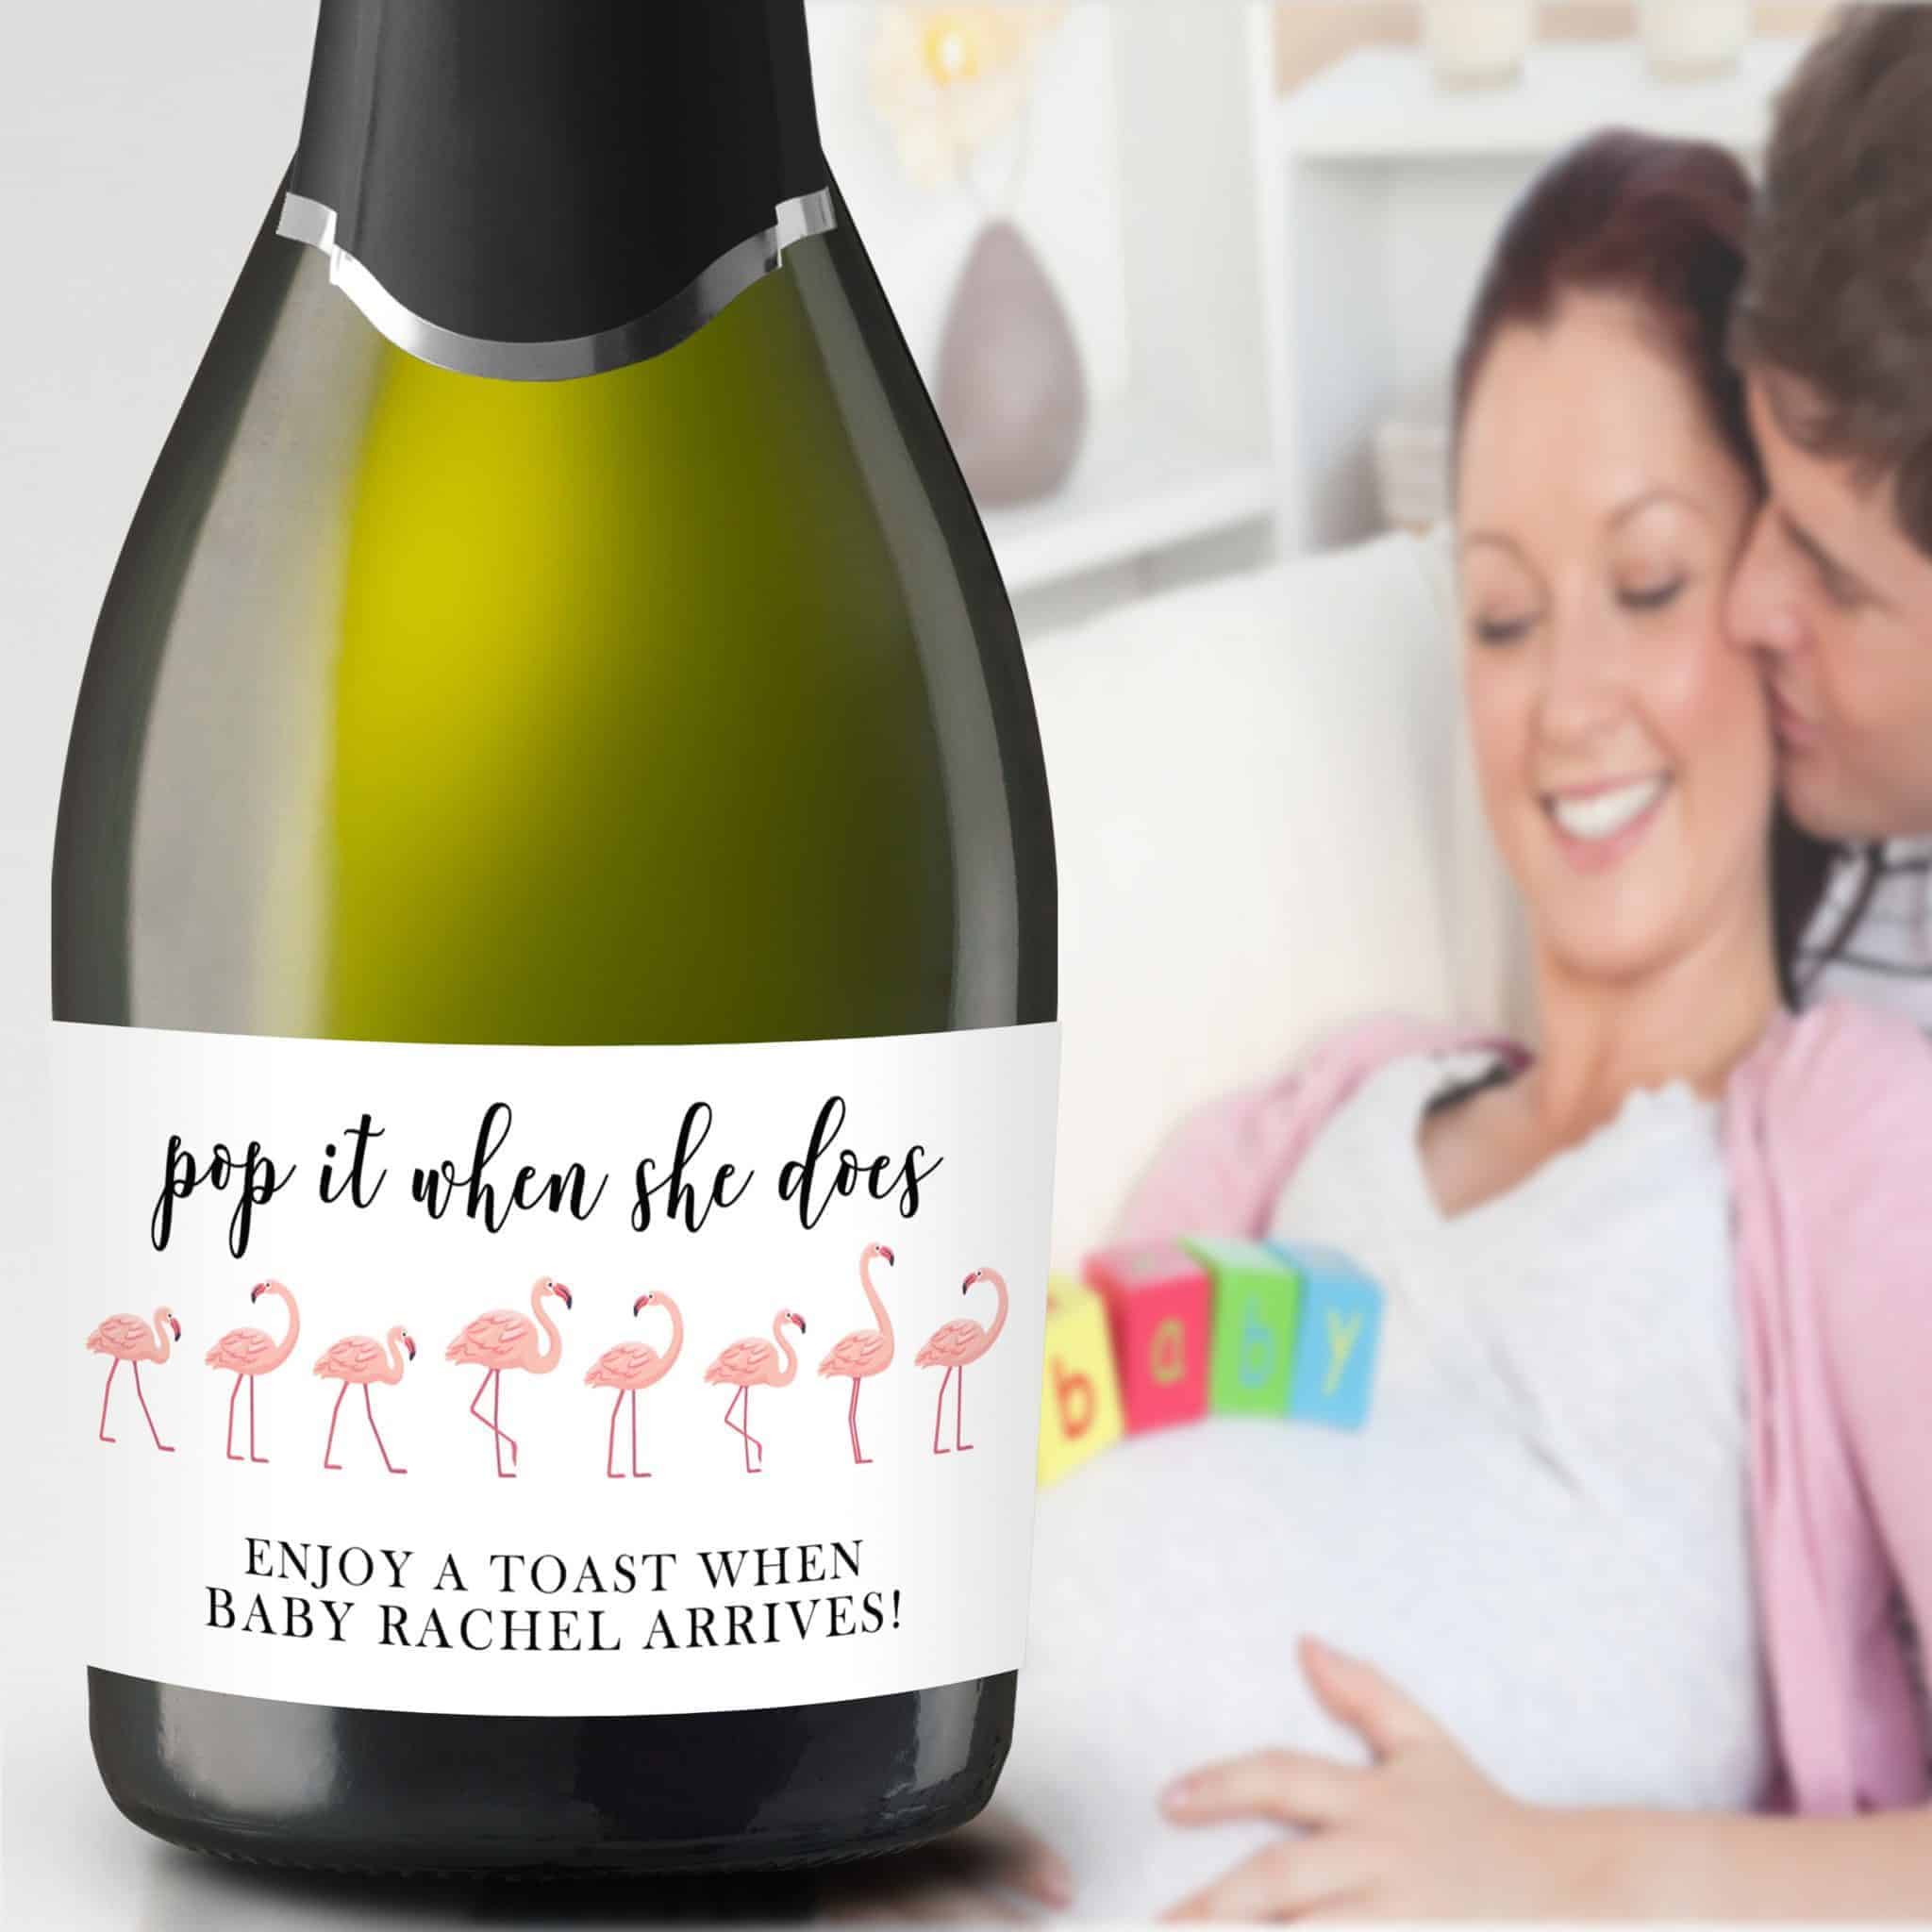 Mini Champagne Bottle Labels for Baby ShowerPop it When She Does Floral Design Set of 8 Mini Champagne Label Stickers